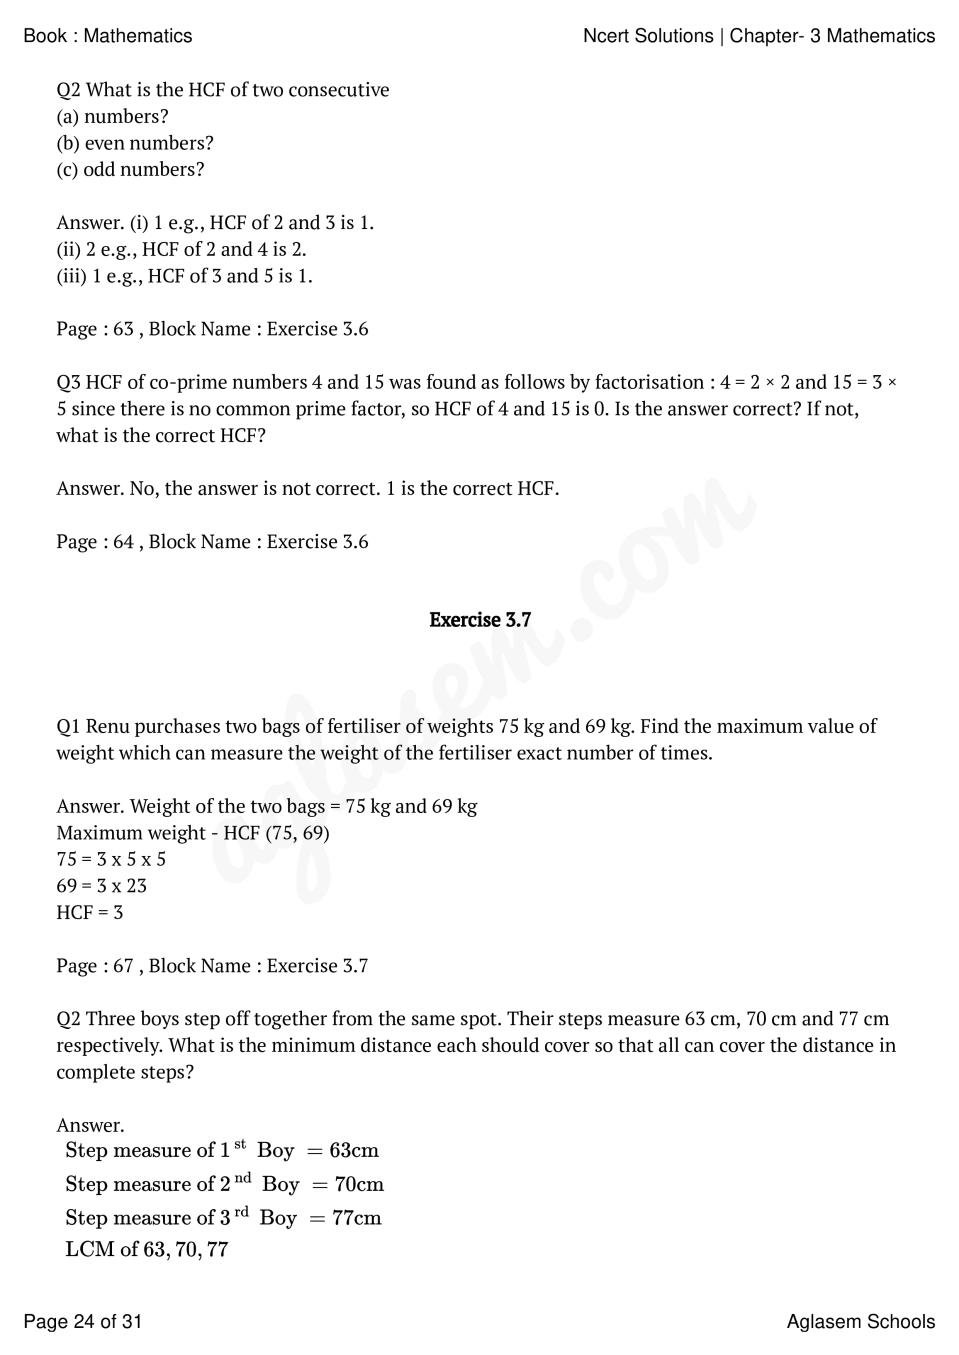 Ncert Solutions For Class 6 Maths Chapter 3 Playing With Numbers Pdf